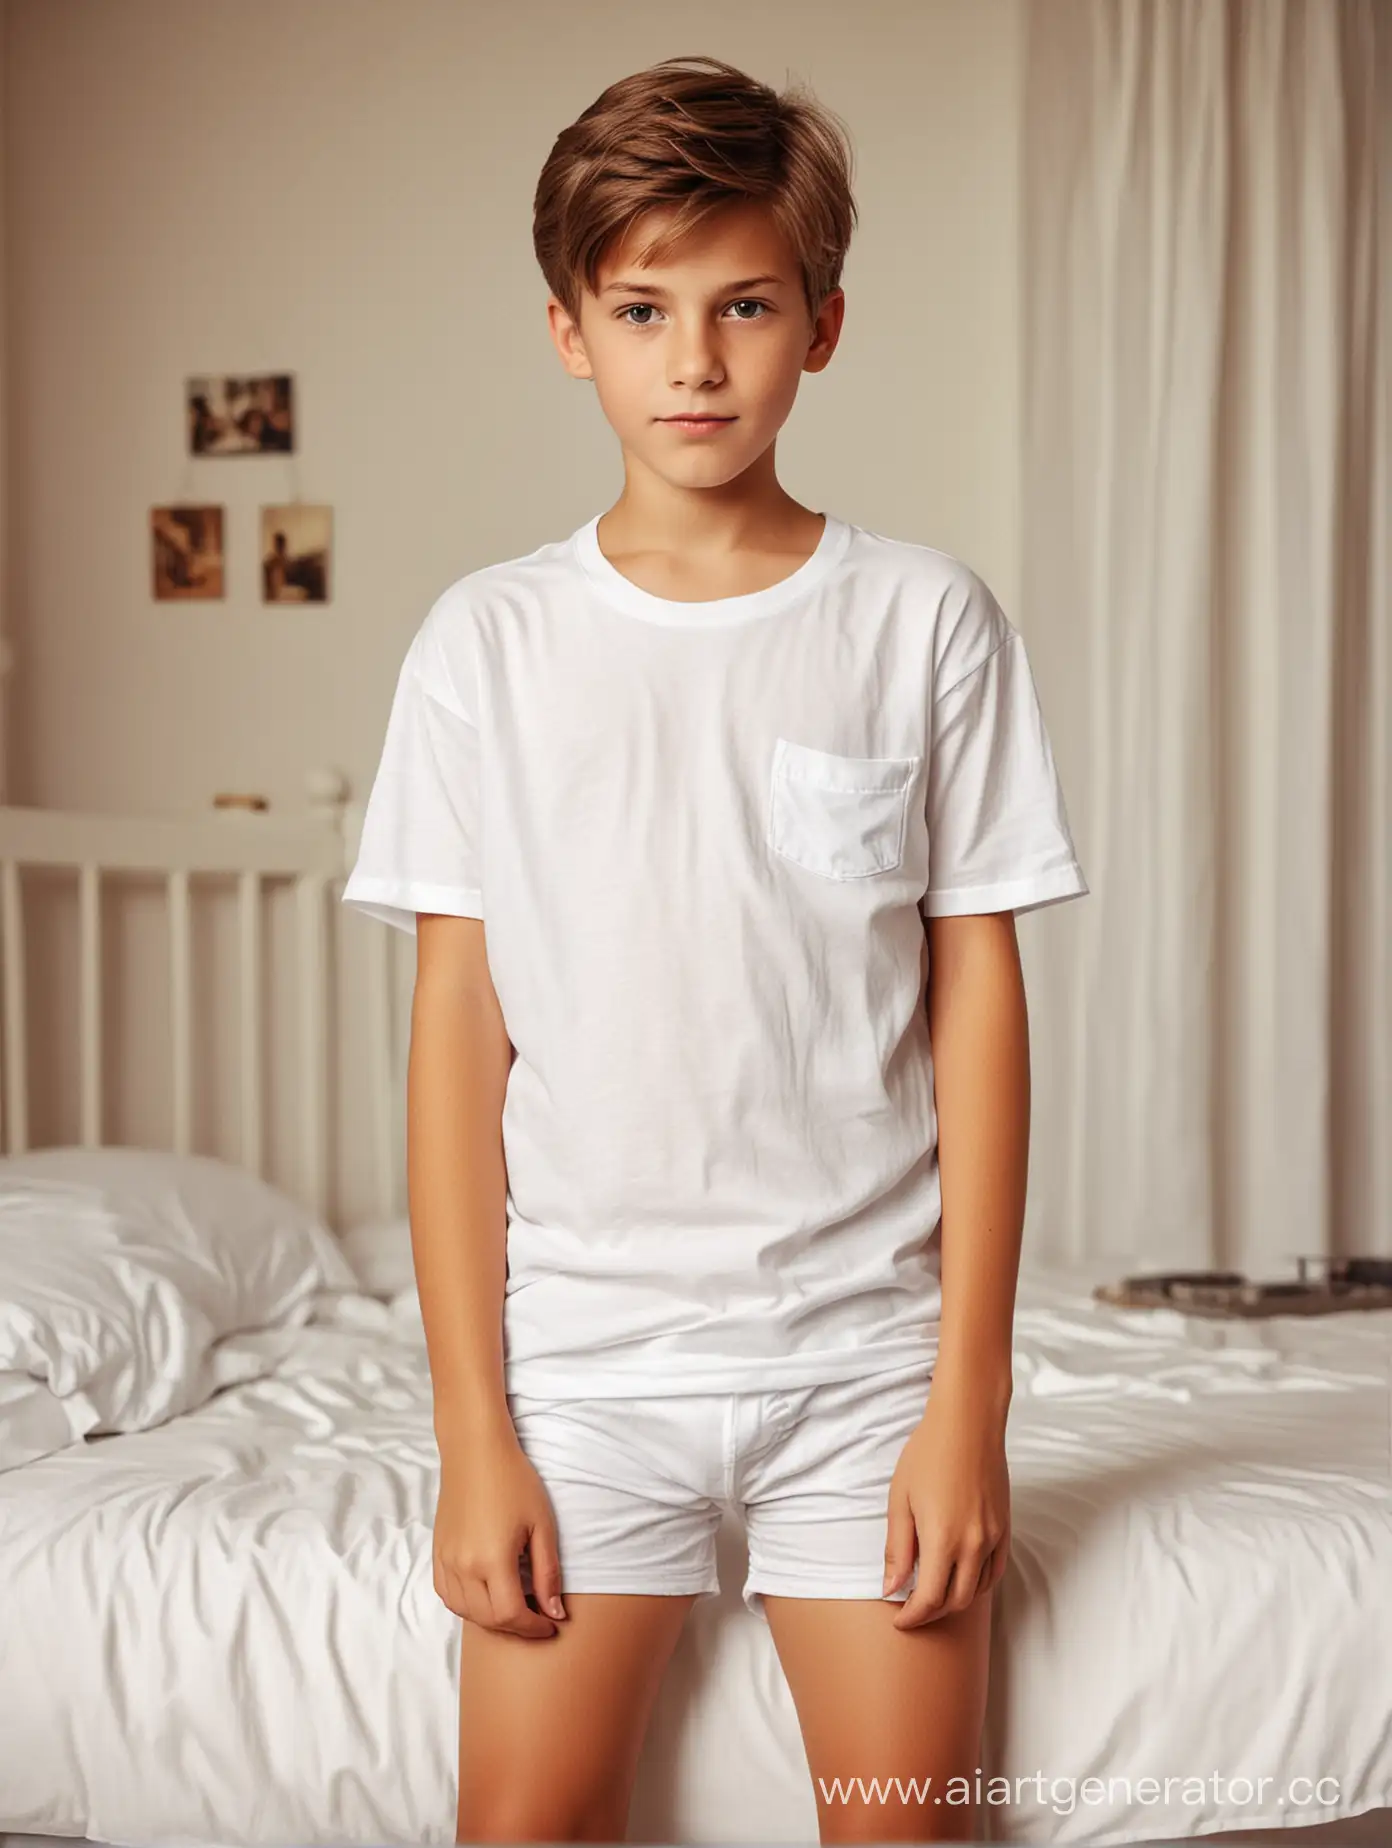 Boy-in-Retro-Style-Bedroom-Wearing-White-Tshirt-and-Shorts